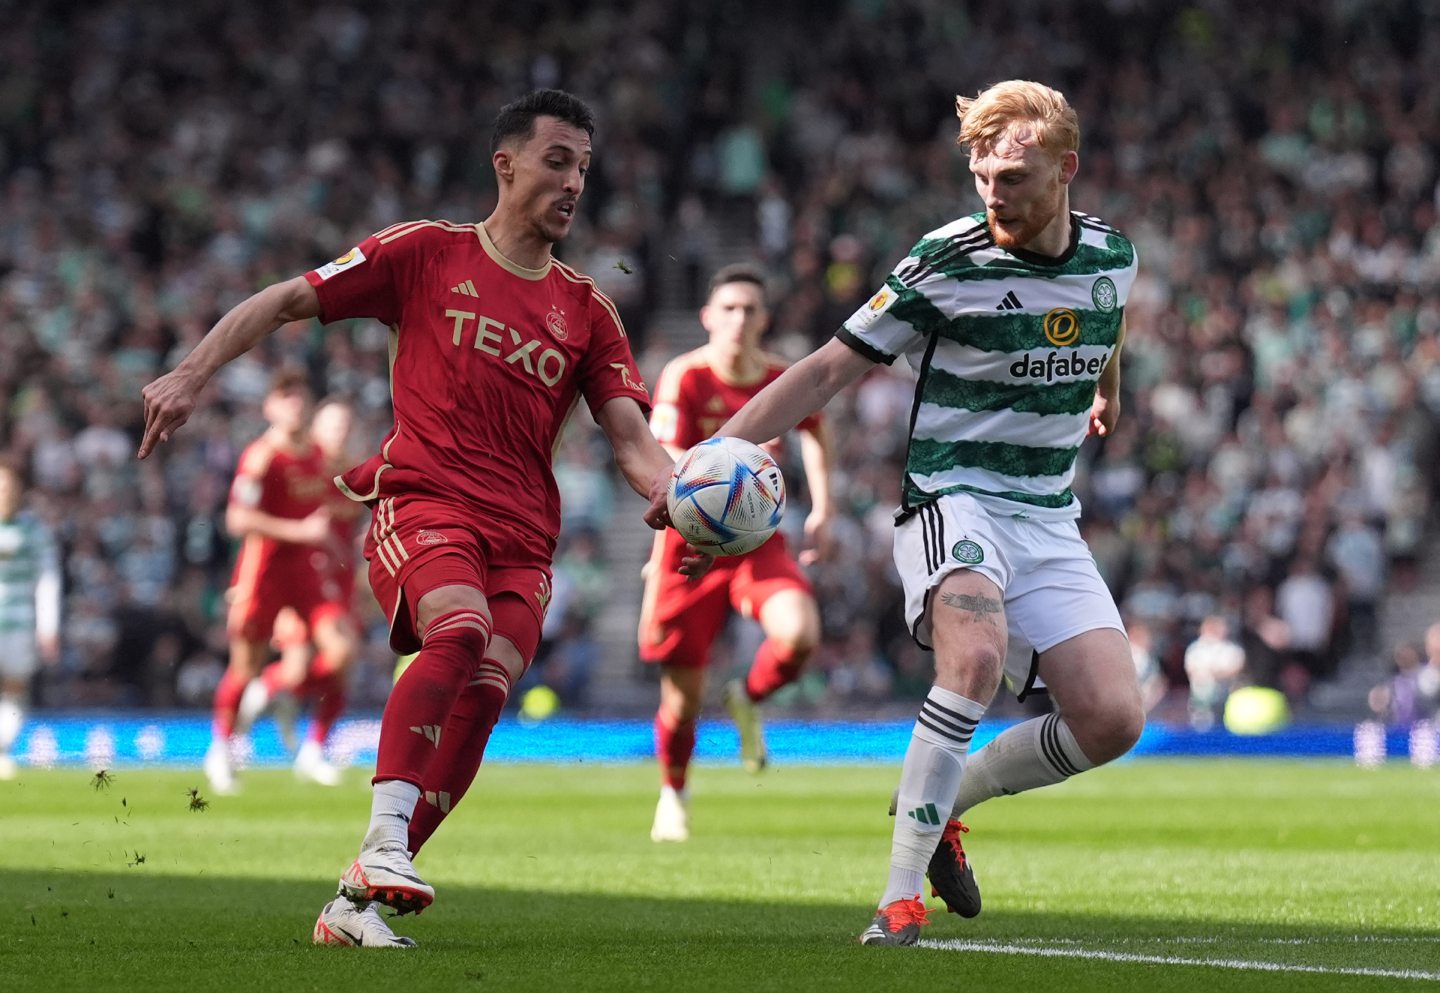 Celtic's Liam Scales (right) handles the ball, resulting in a VAR check, under pressure from Aberdeen's Bojan Miovski. Image: PA.